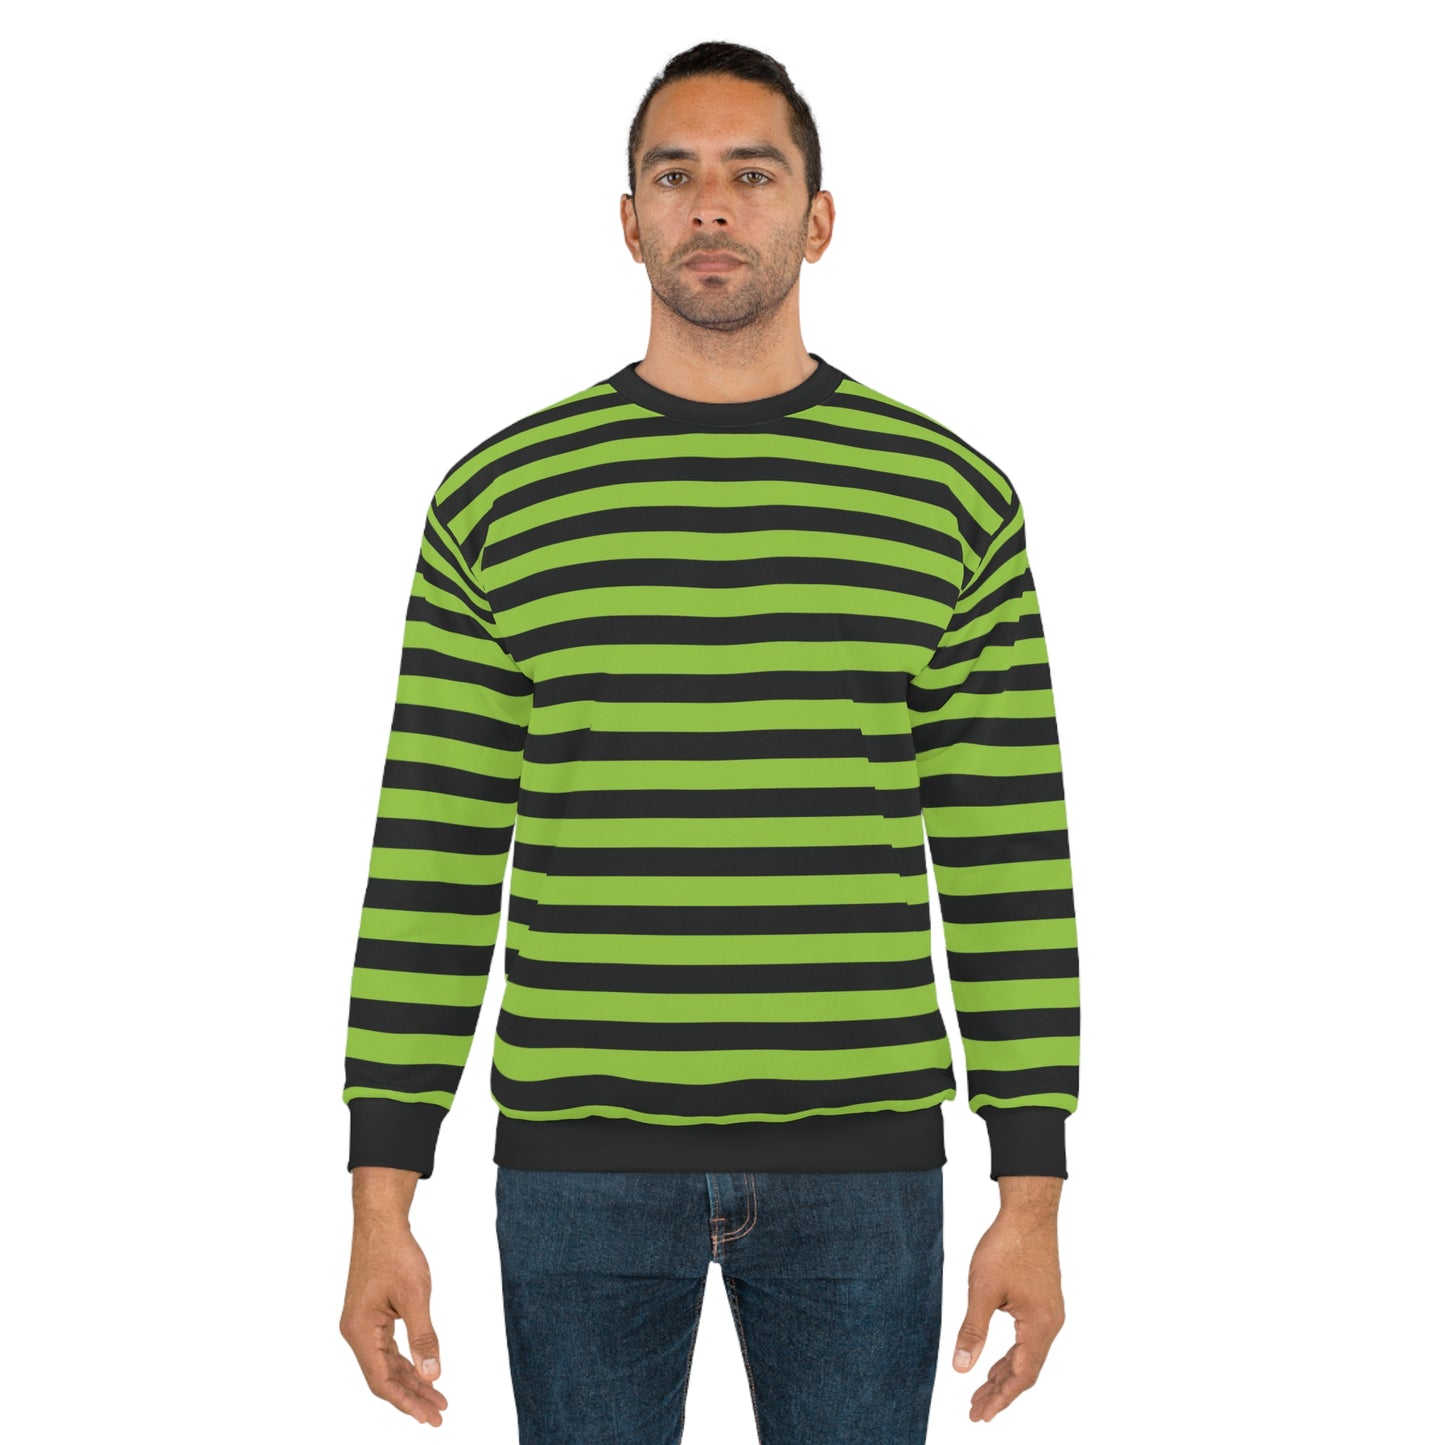 green and black striped sweater